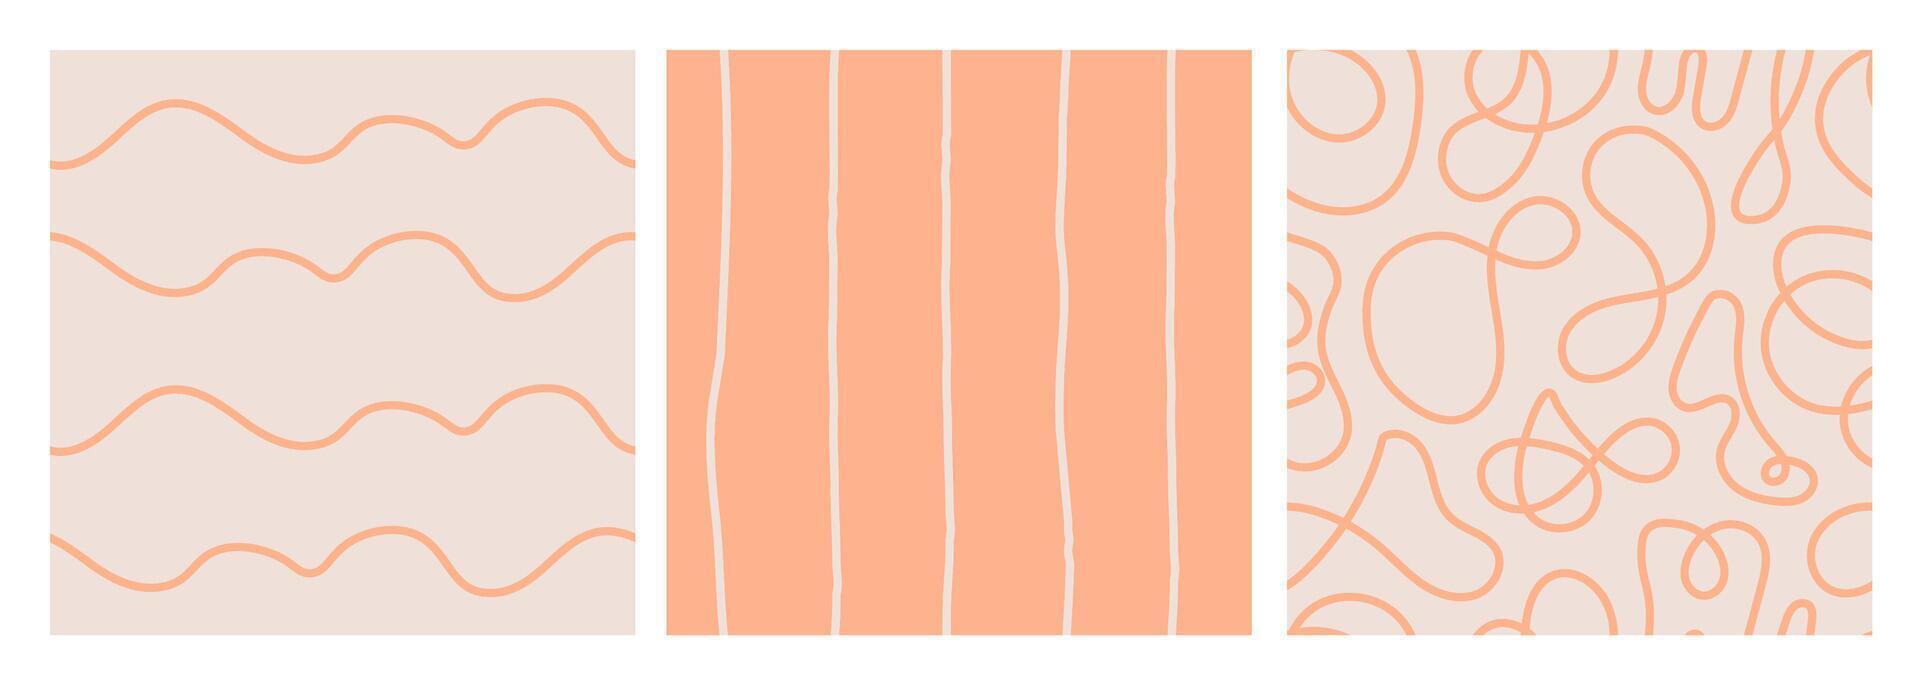 Abstract orange seamless patterns Set with curvy lines vector